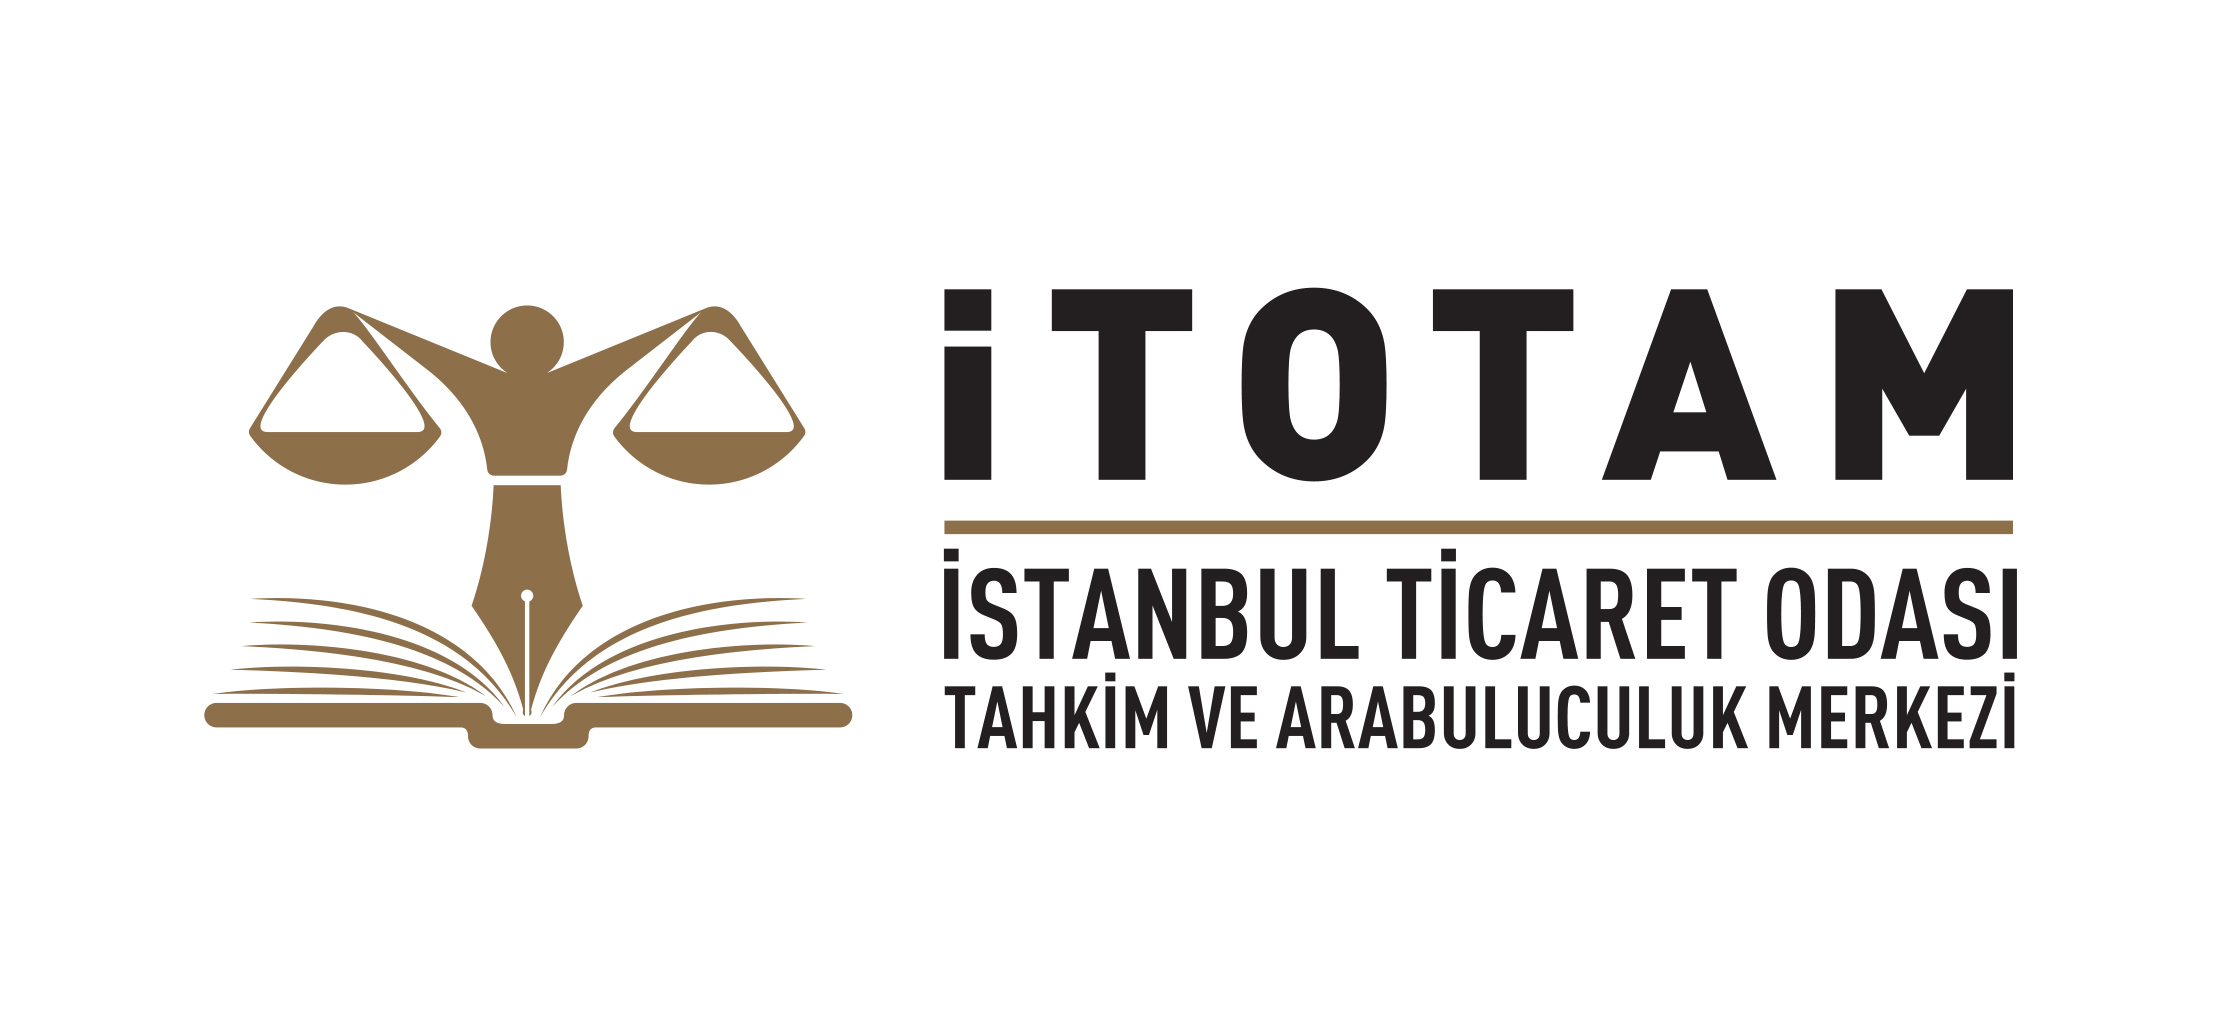 ISTANBUL CHAMBER OF COMMERCE ARBITRATION AND MEDIATION CENTER